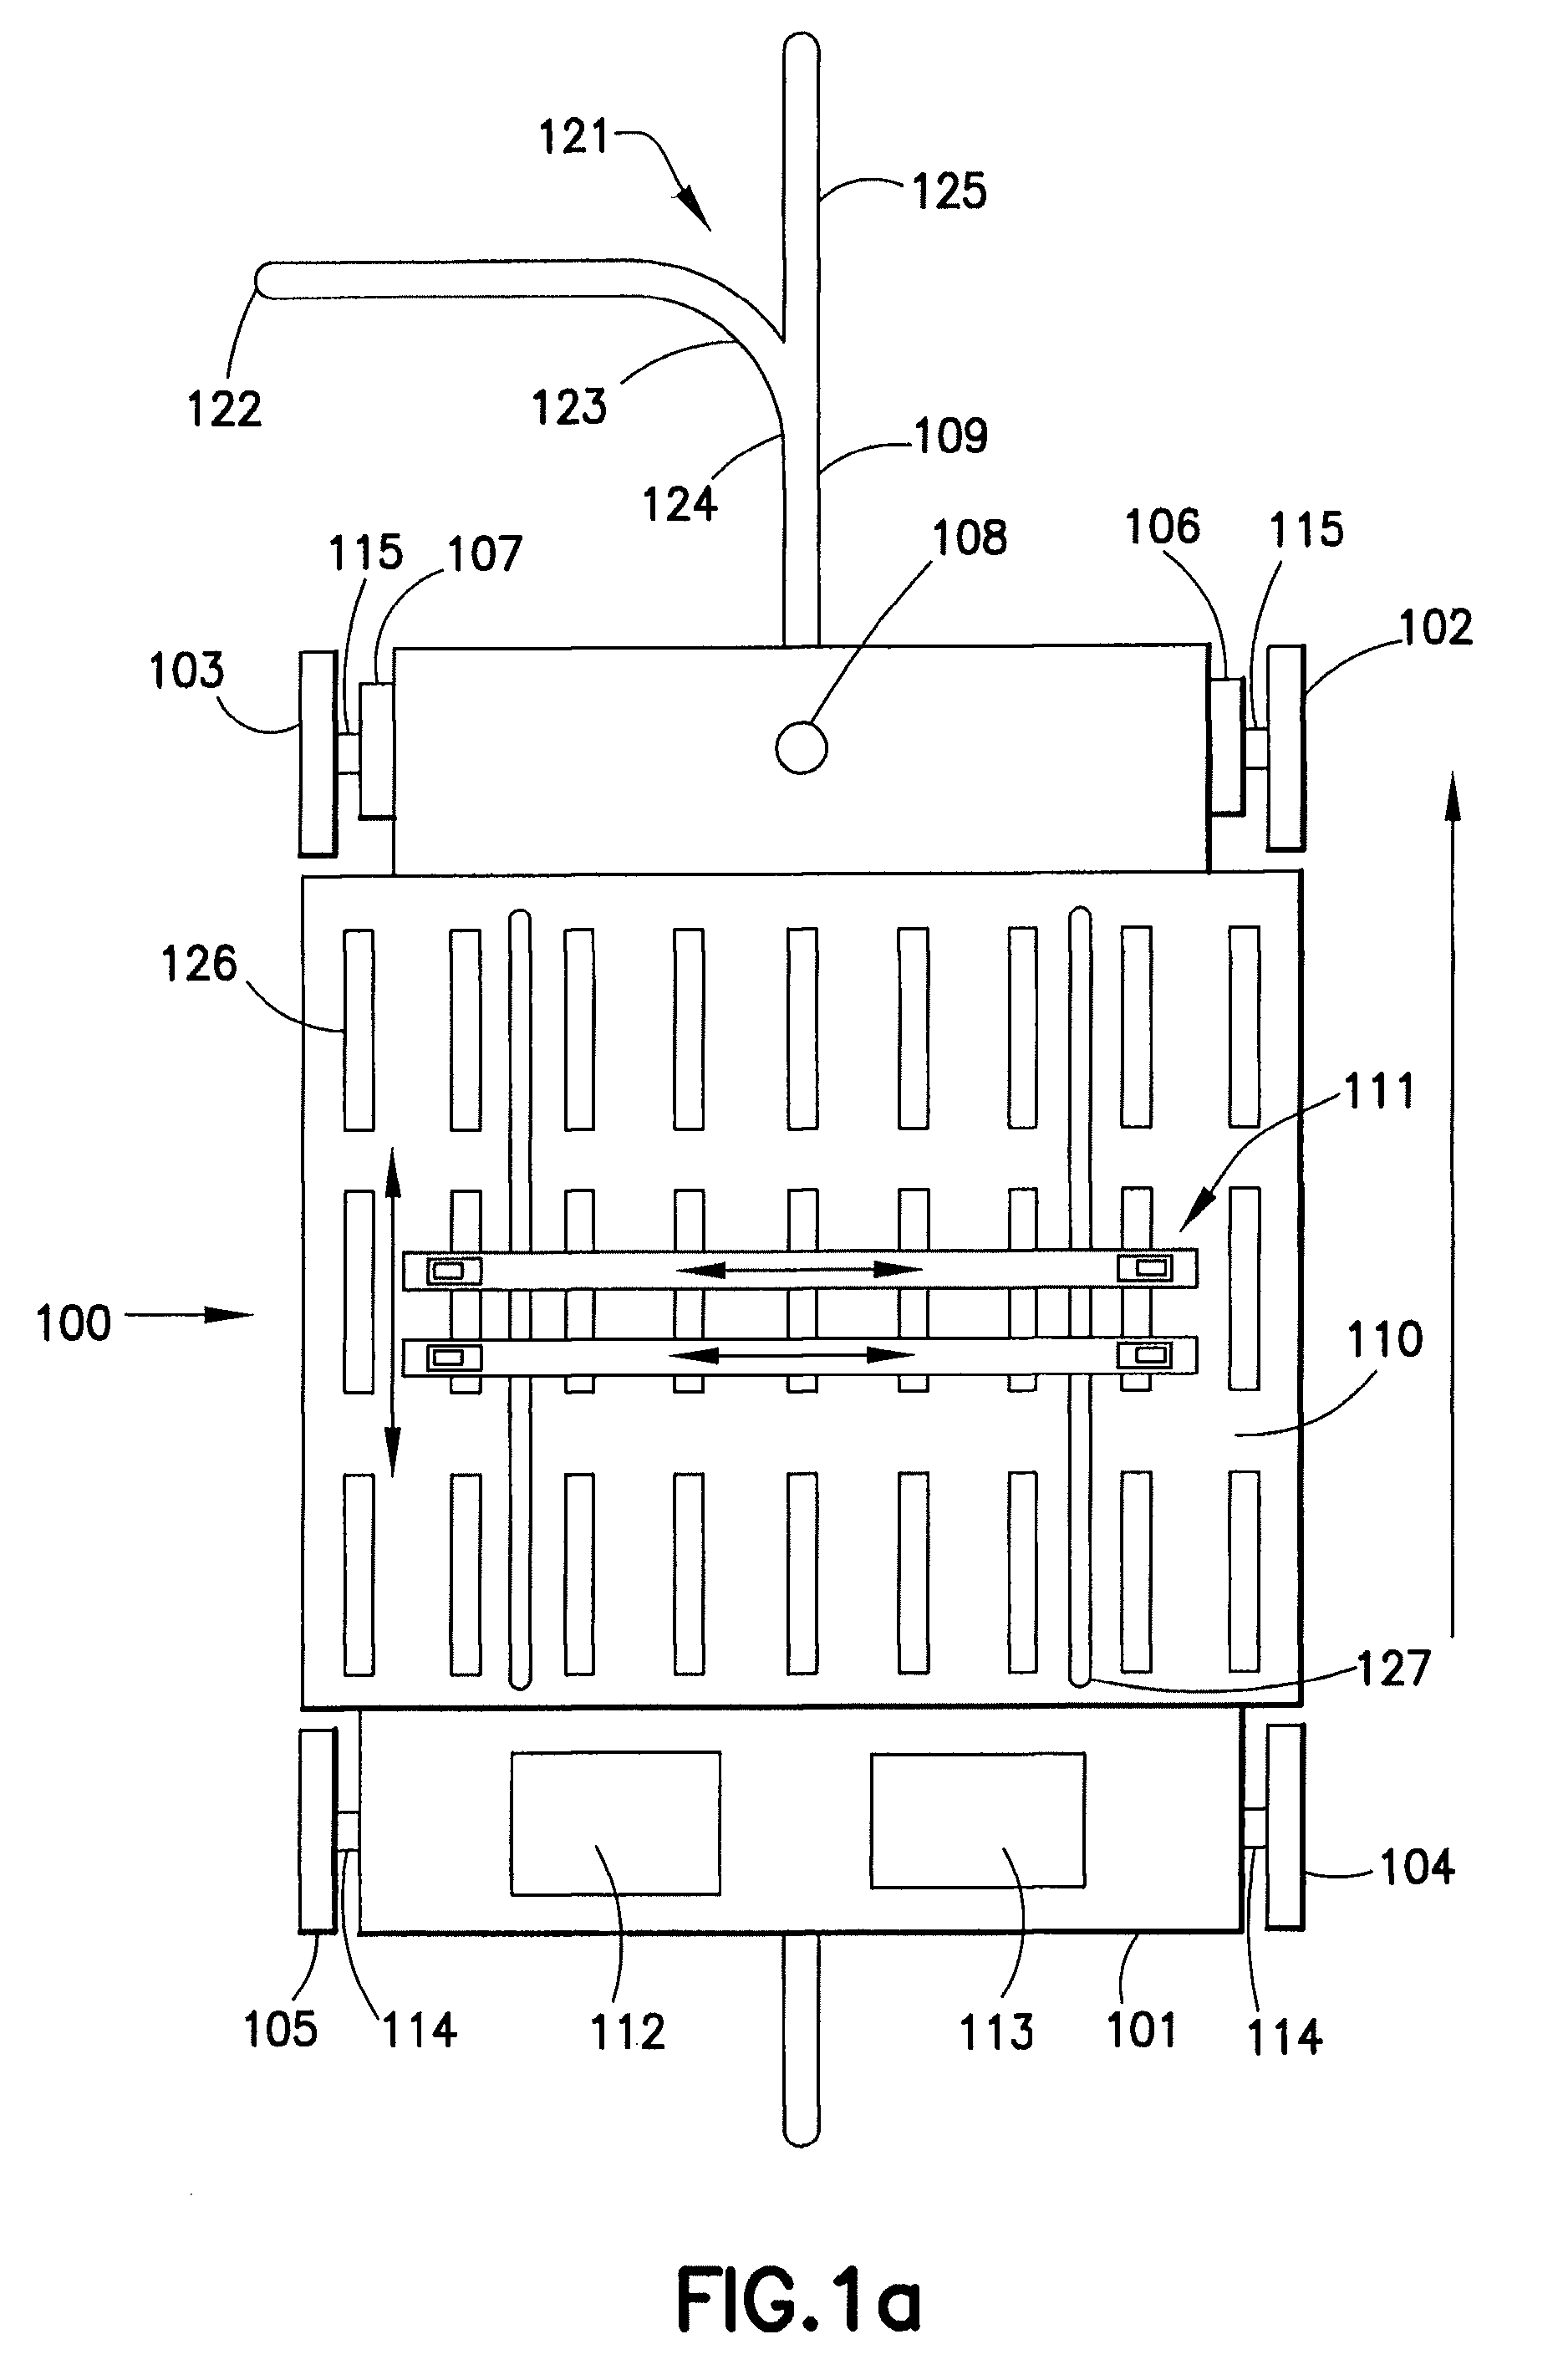 Materials-handling system using autonomous transfer and transport vehicles